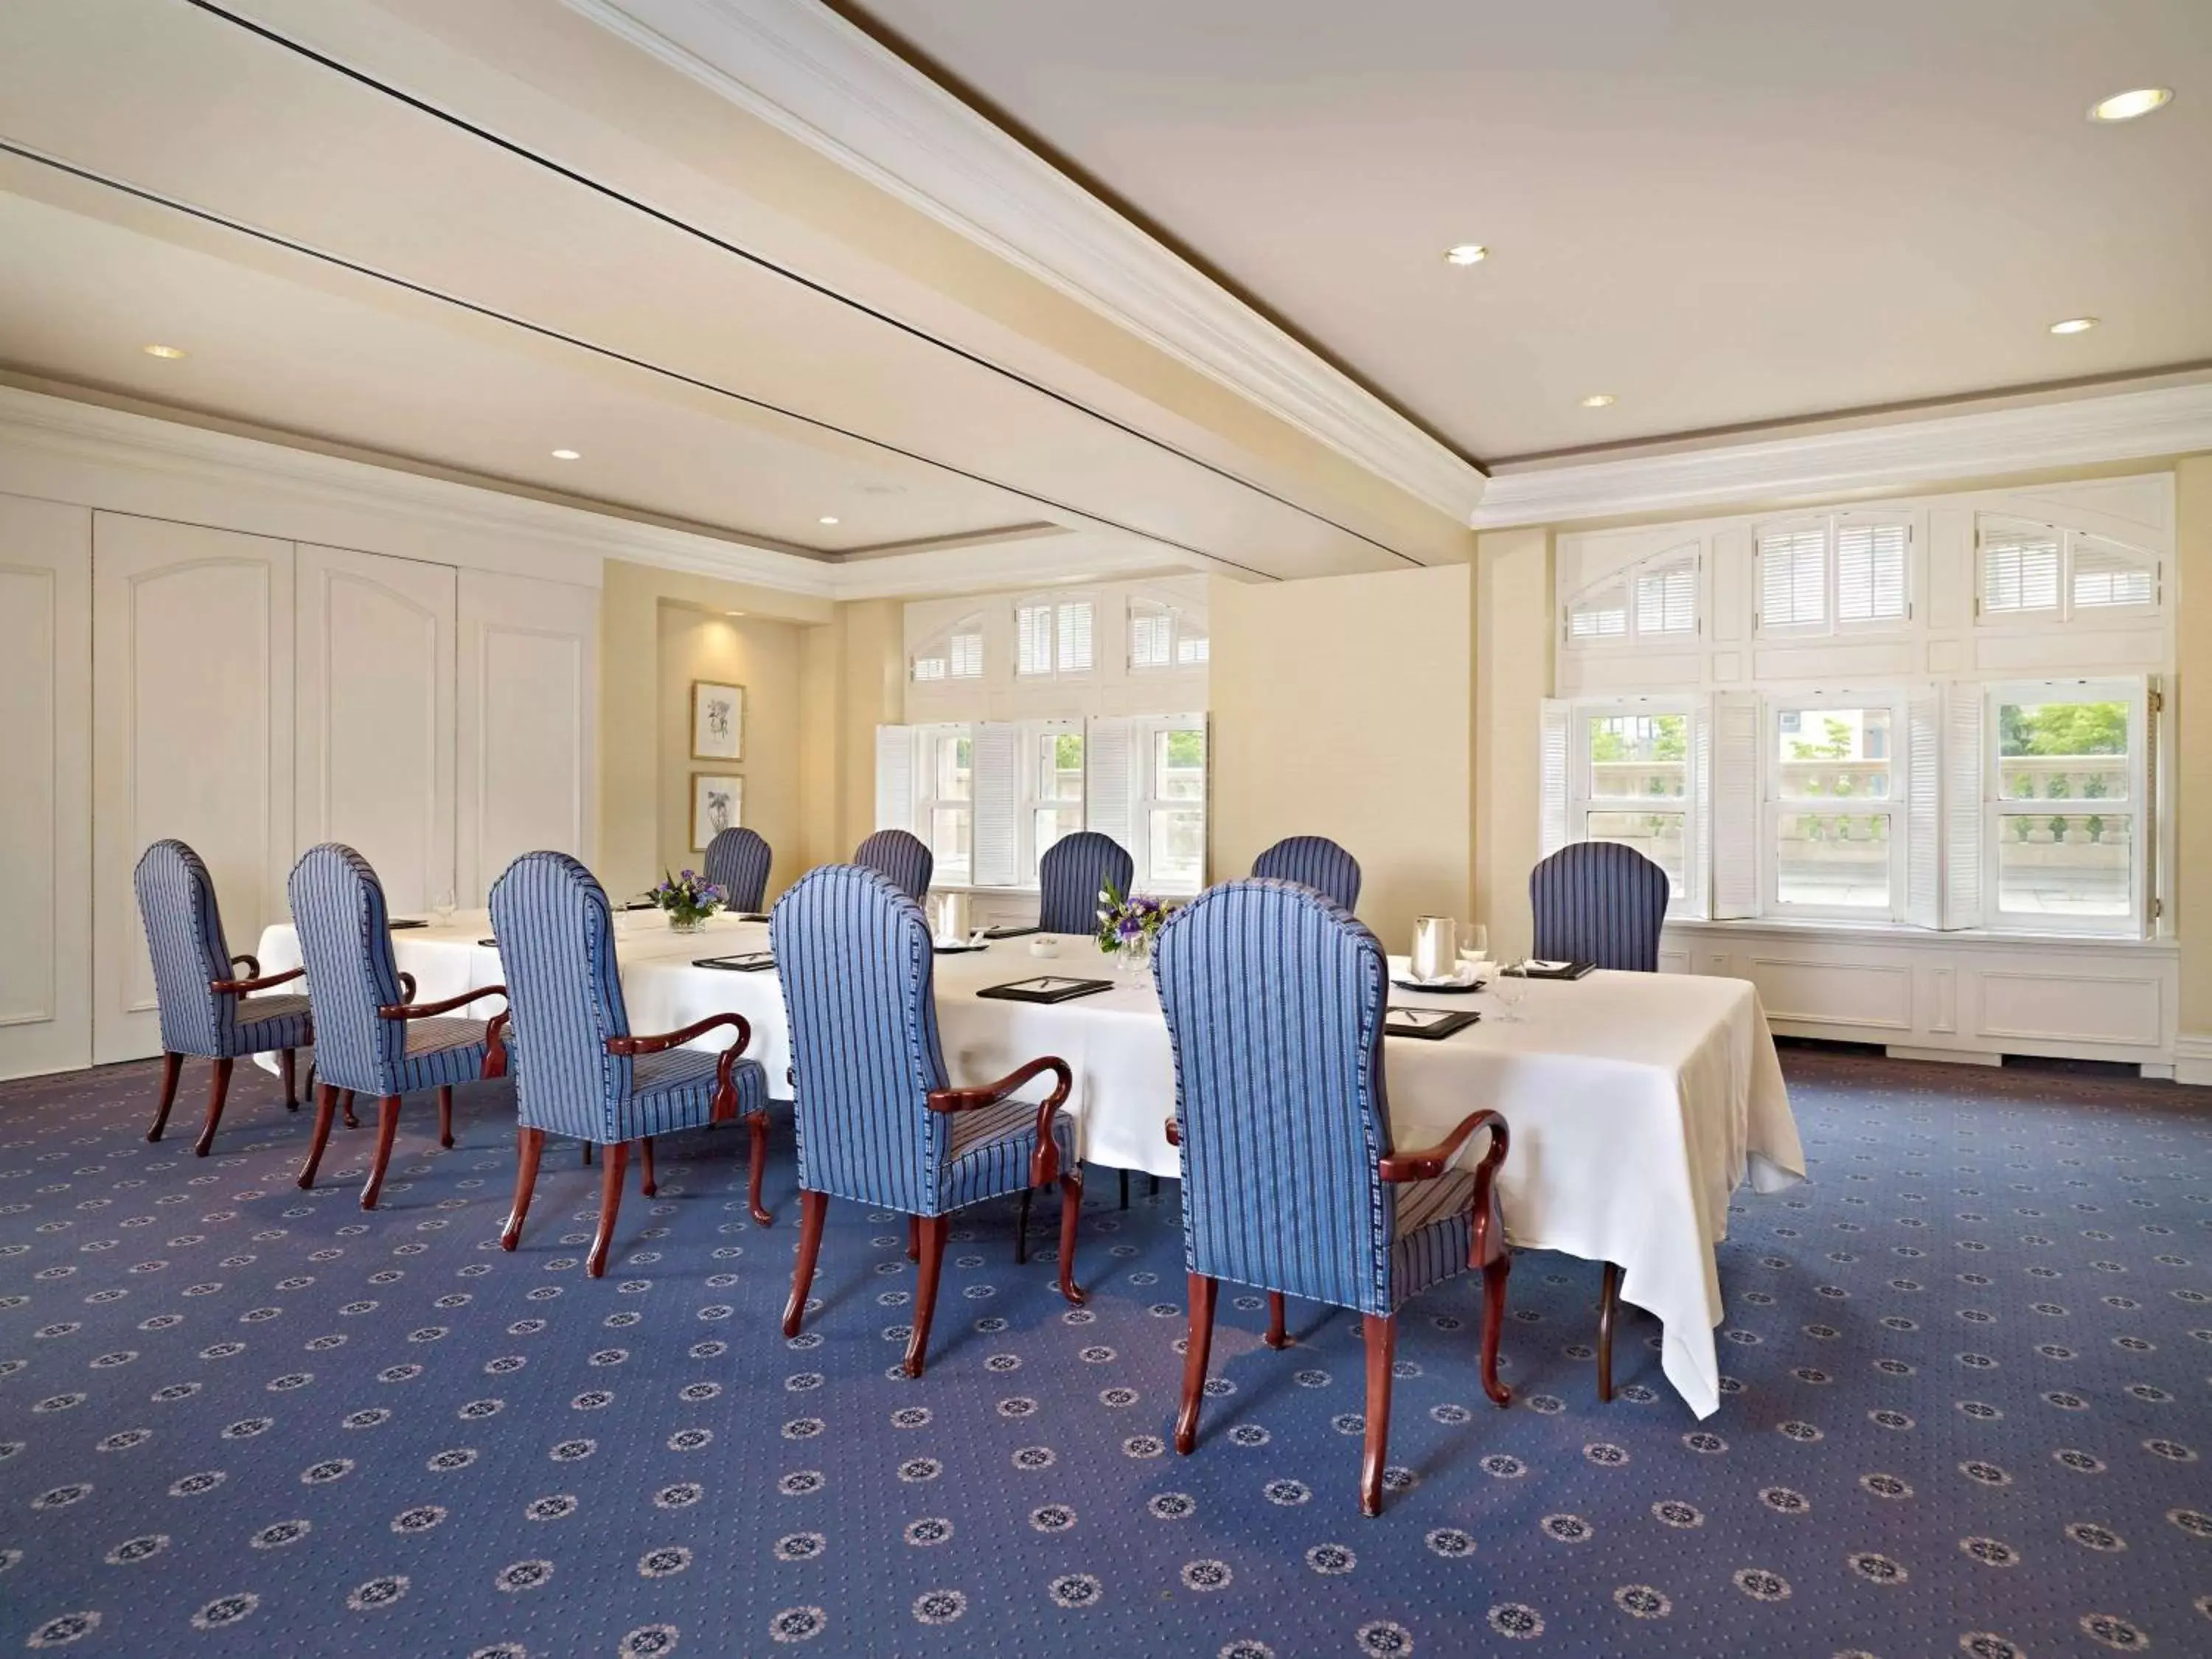 Meeting/conference room in Fairmont Hotel Macdonald